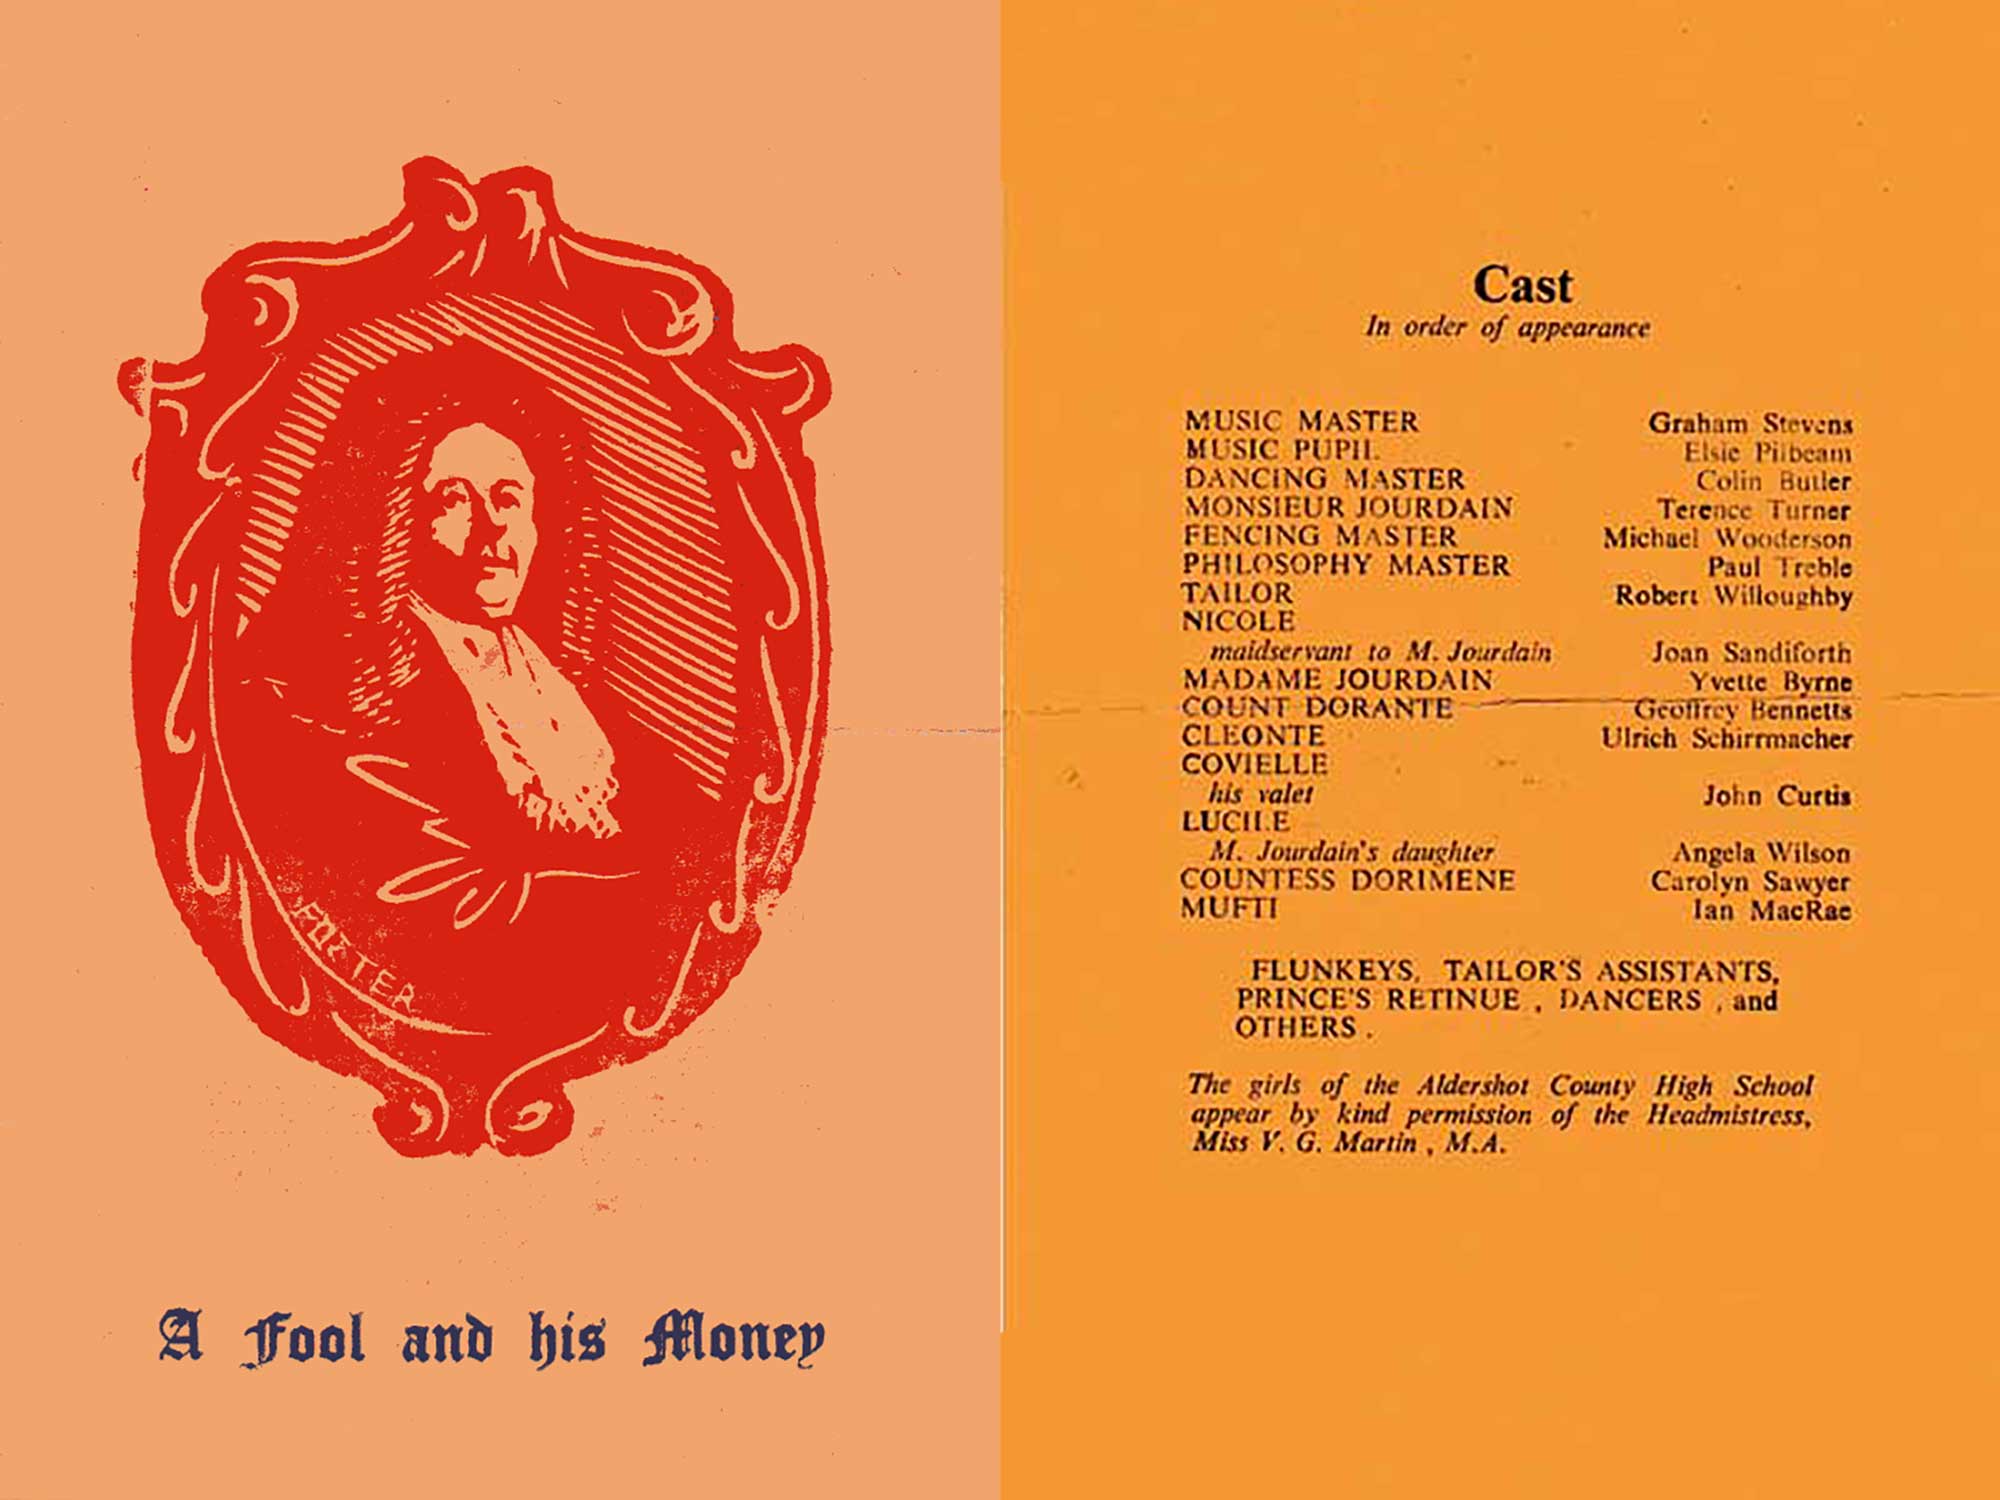 Programme and cast